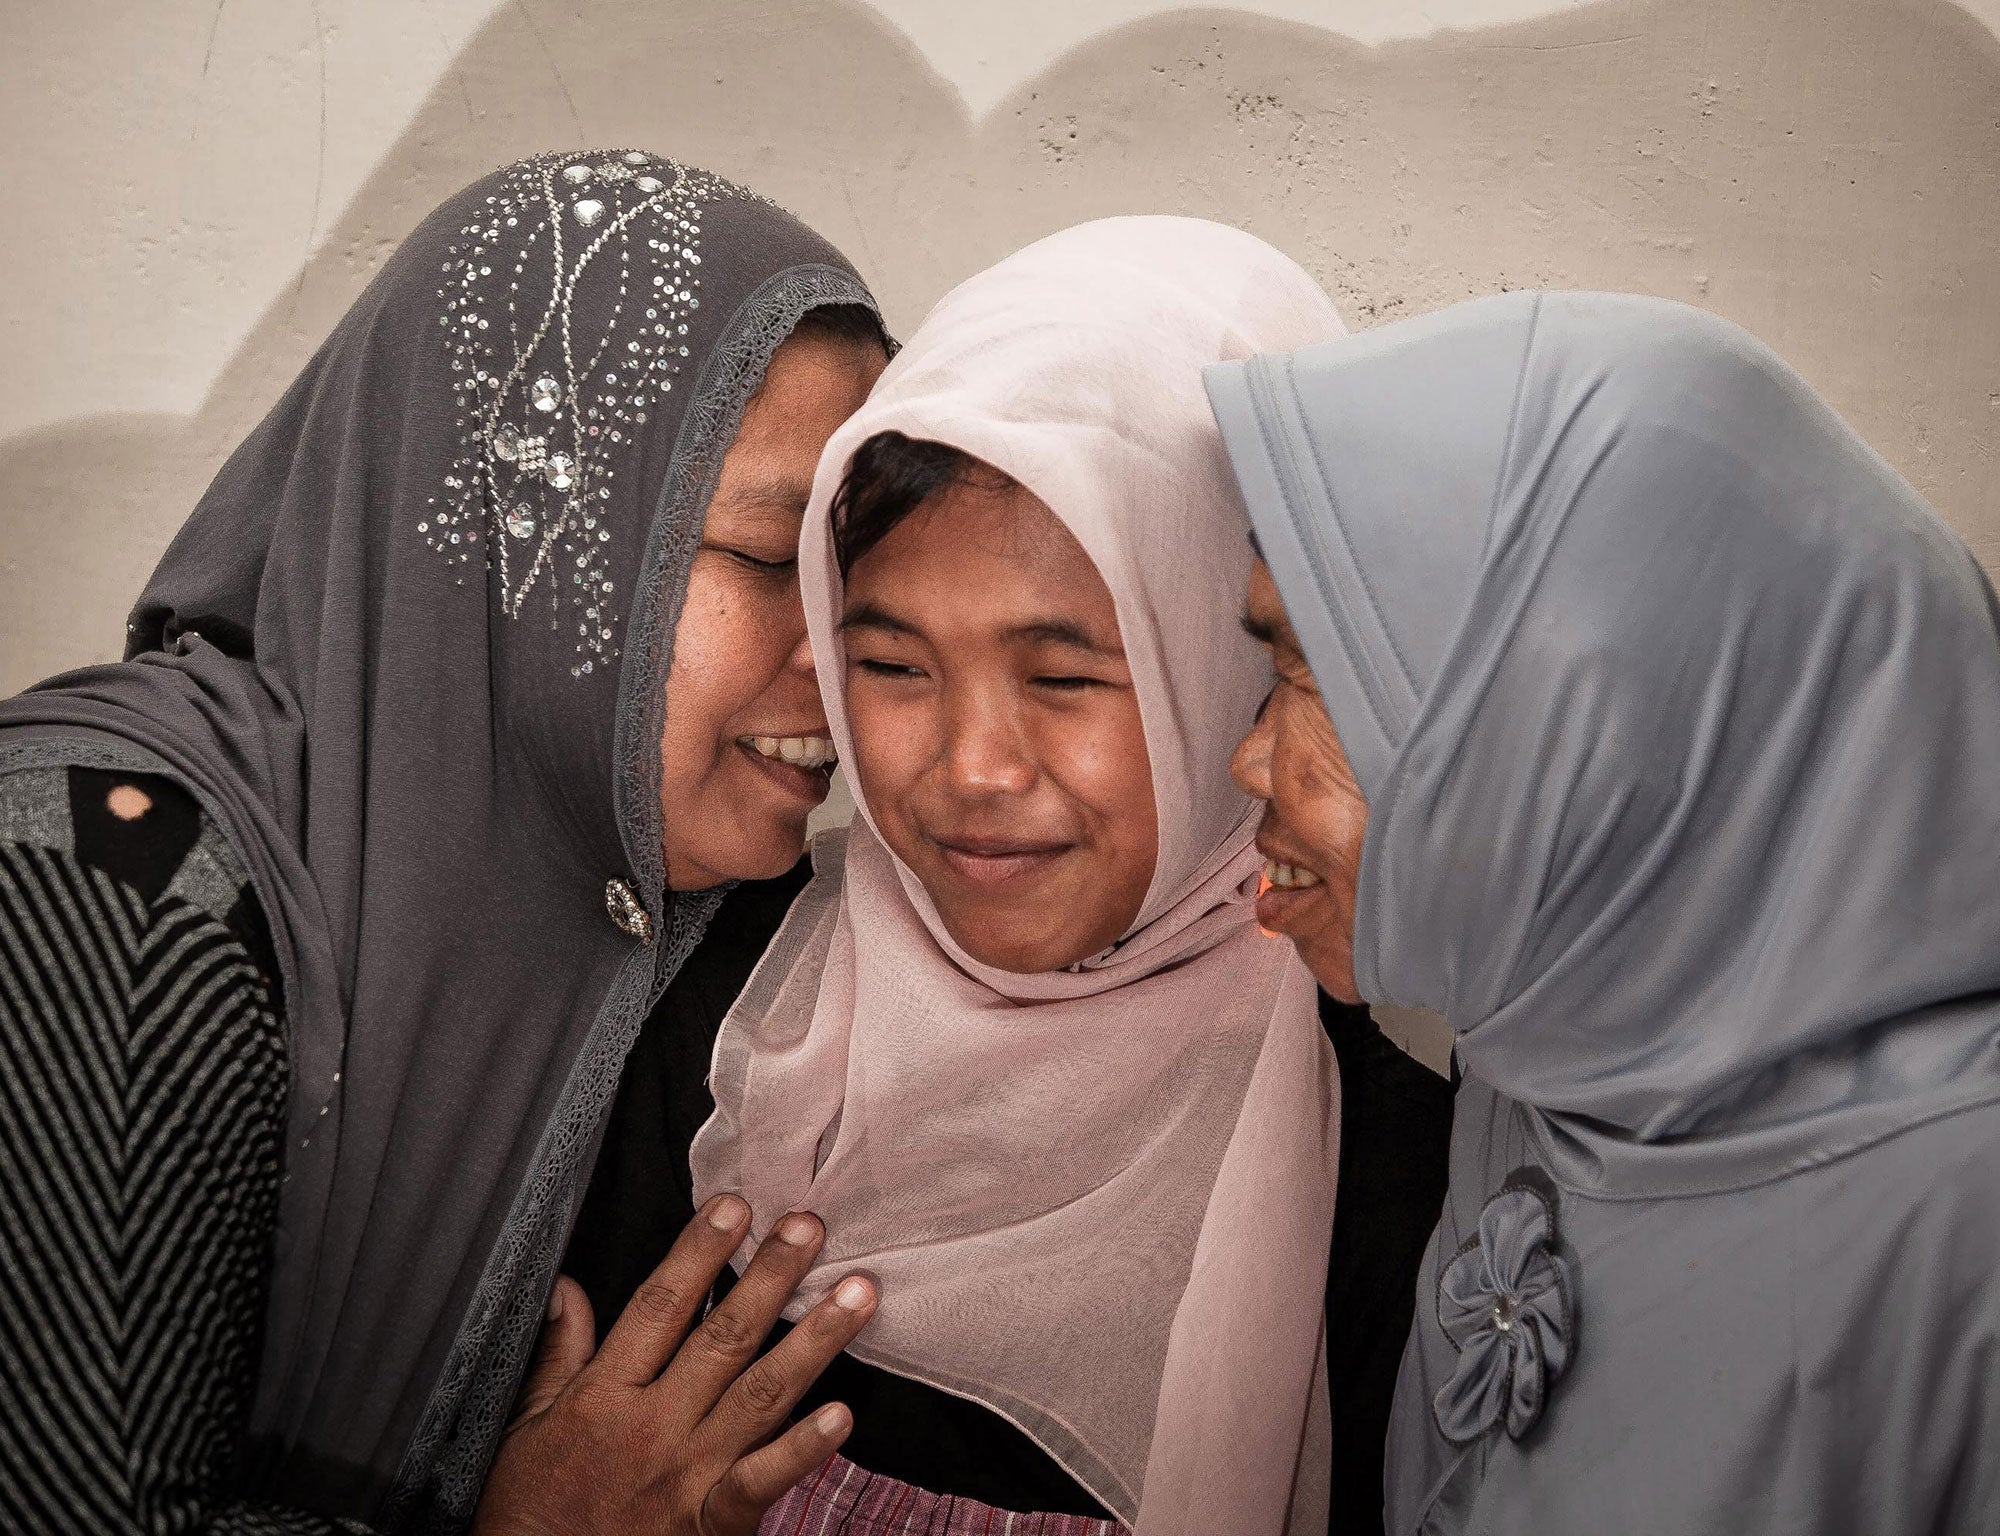 Jamaliah (L) gives a hug to her daughter Raudhatul Jannah (C) after being reunited in Meulaboh, Aceh, northern Sumatra, Indonesia, 07 August 2014.